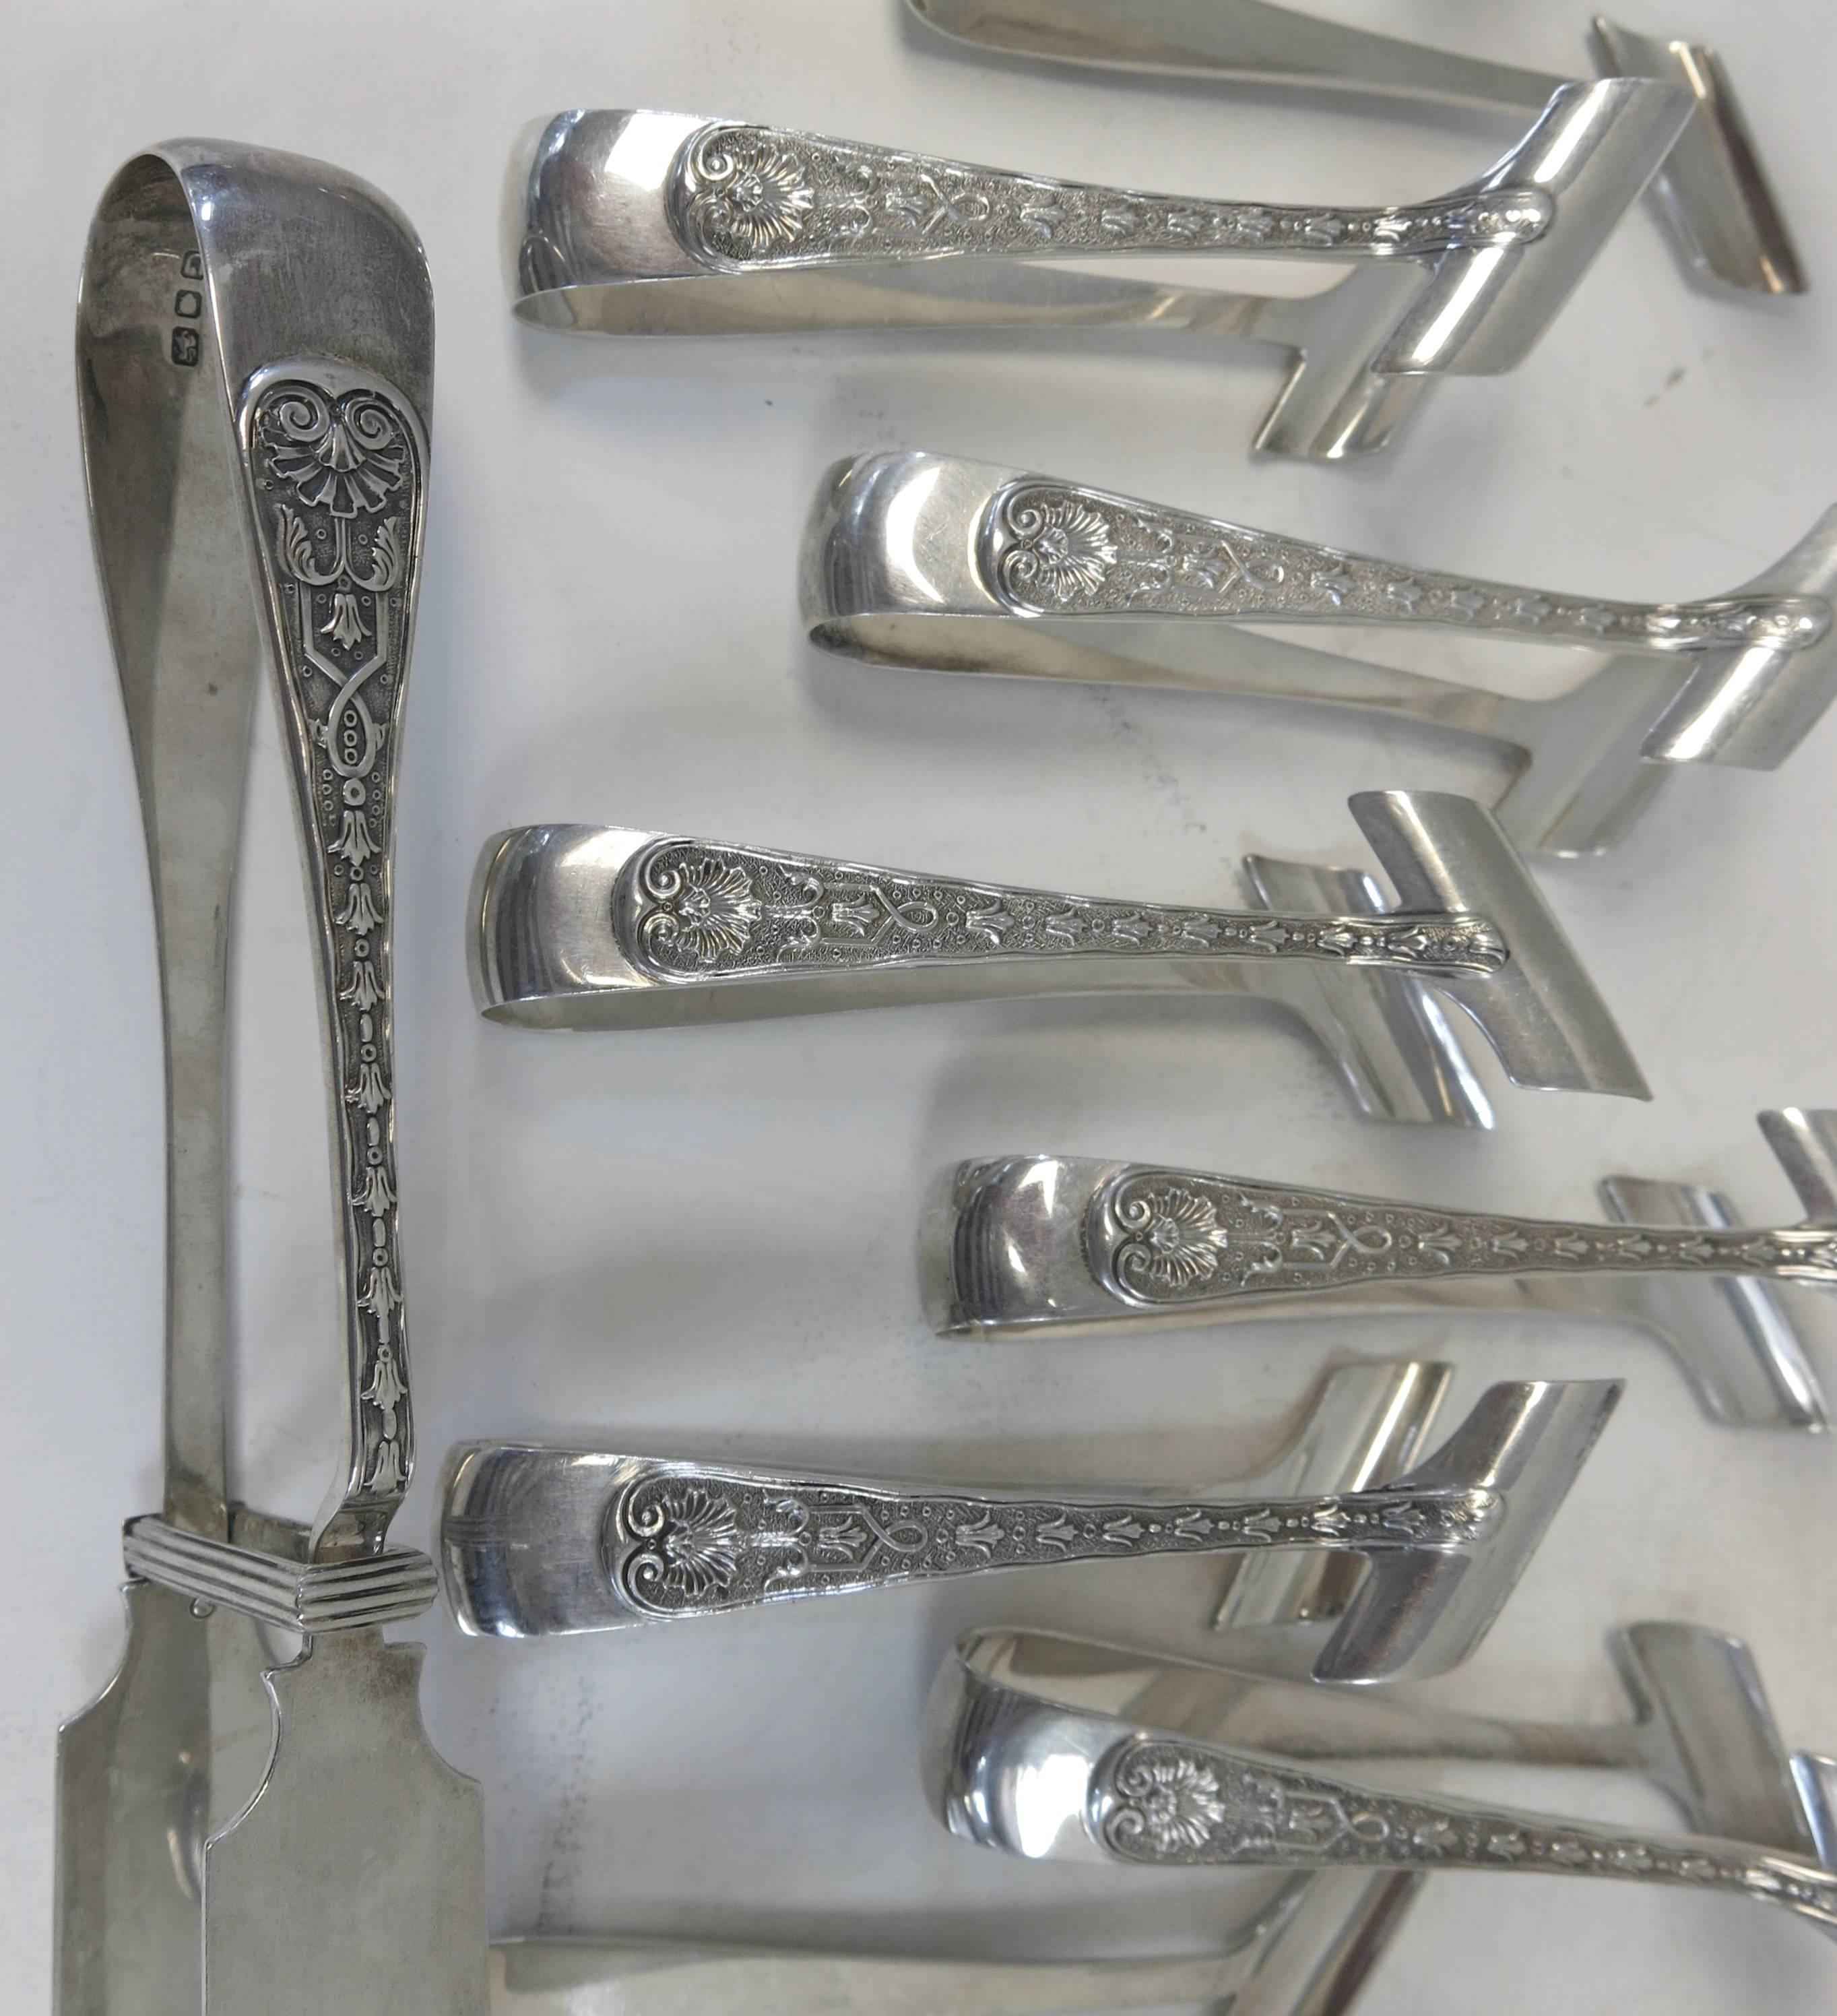 English, sterling silver asparagus tong with 12 individual asparagus eaters. Made by Garrards, The Crown Jewelers in the rare, Elizabethan Pattern. 
Each item is fully and correctly hallmarked,
London, circa 1955.
The server is 8 5/8